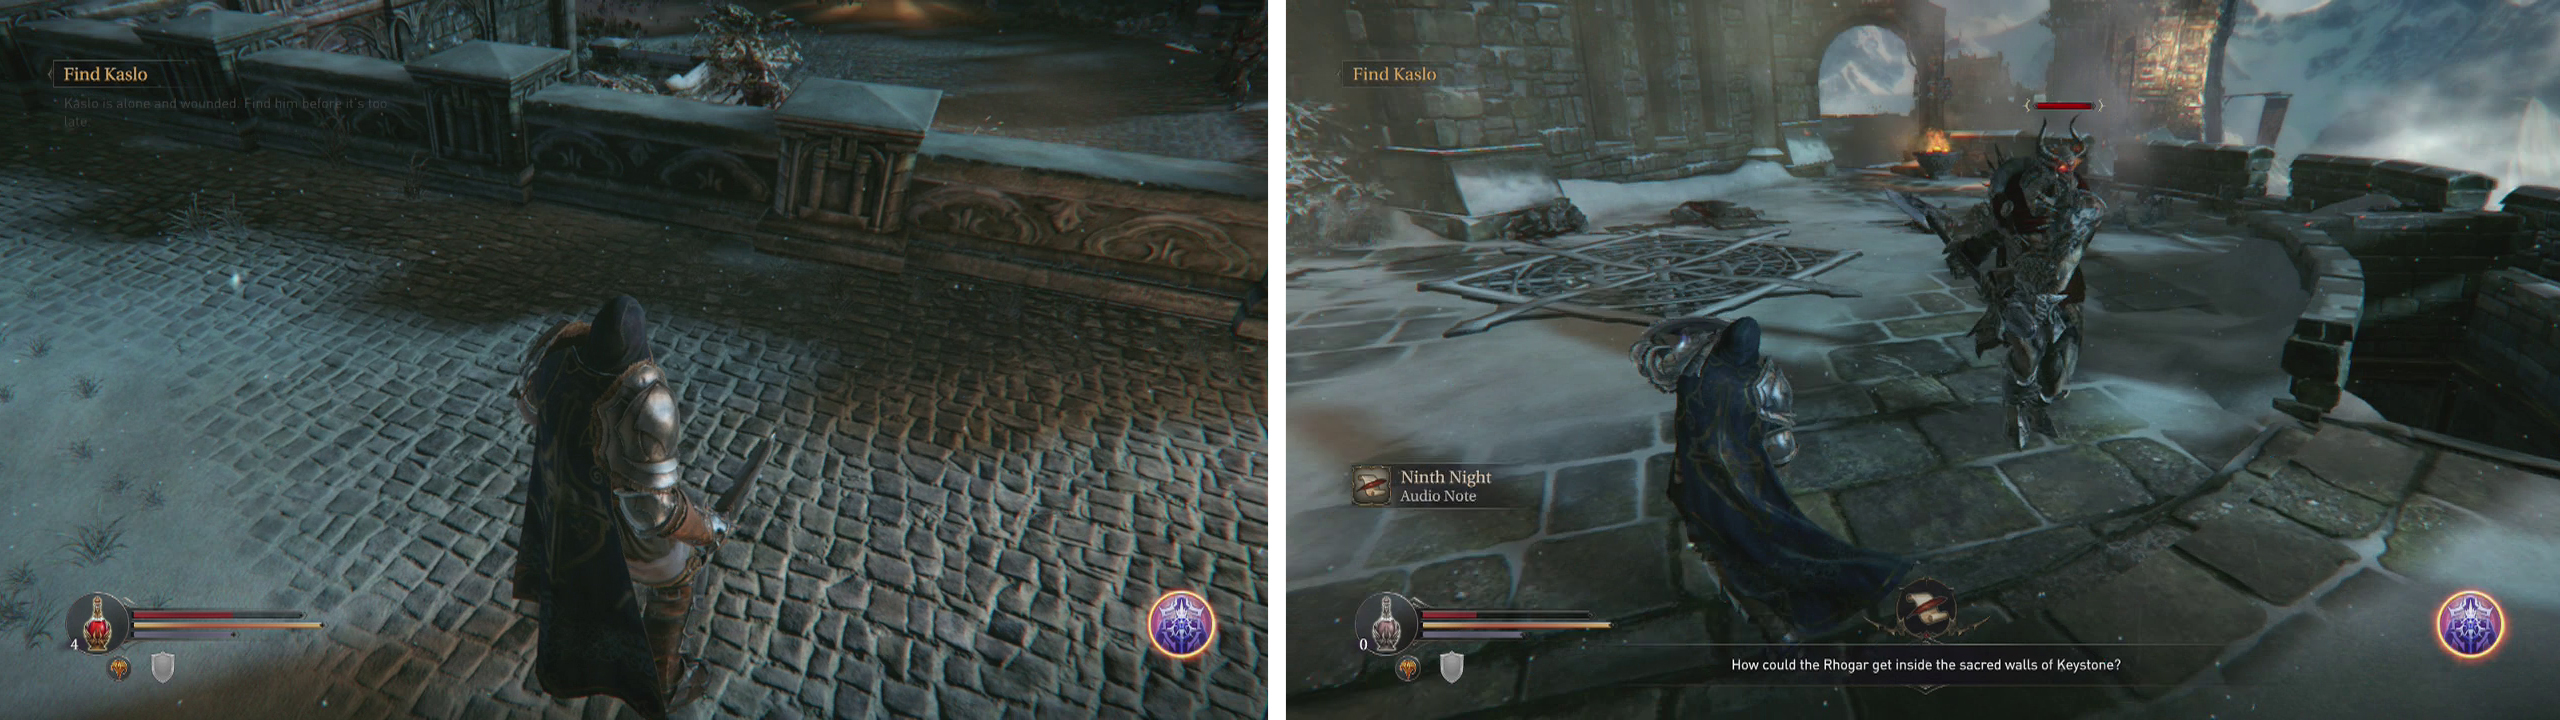 Rogues prefer light armour (left) and their quickness allows them to outmanouver enemies (right).